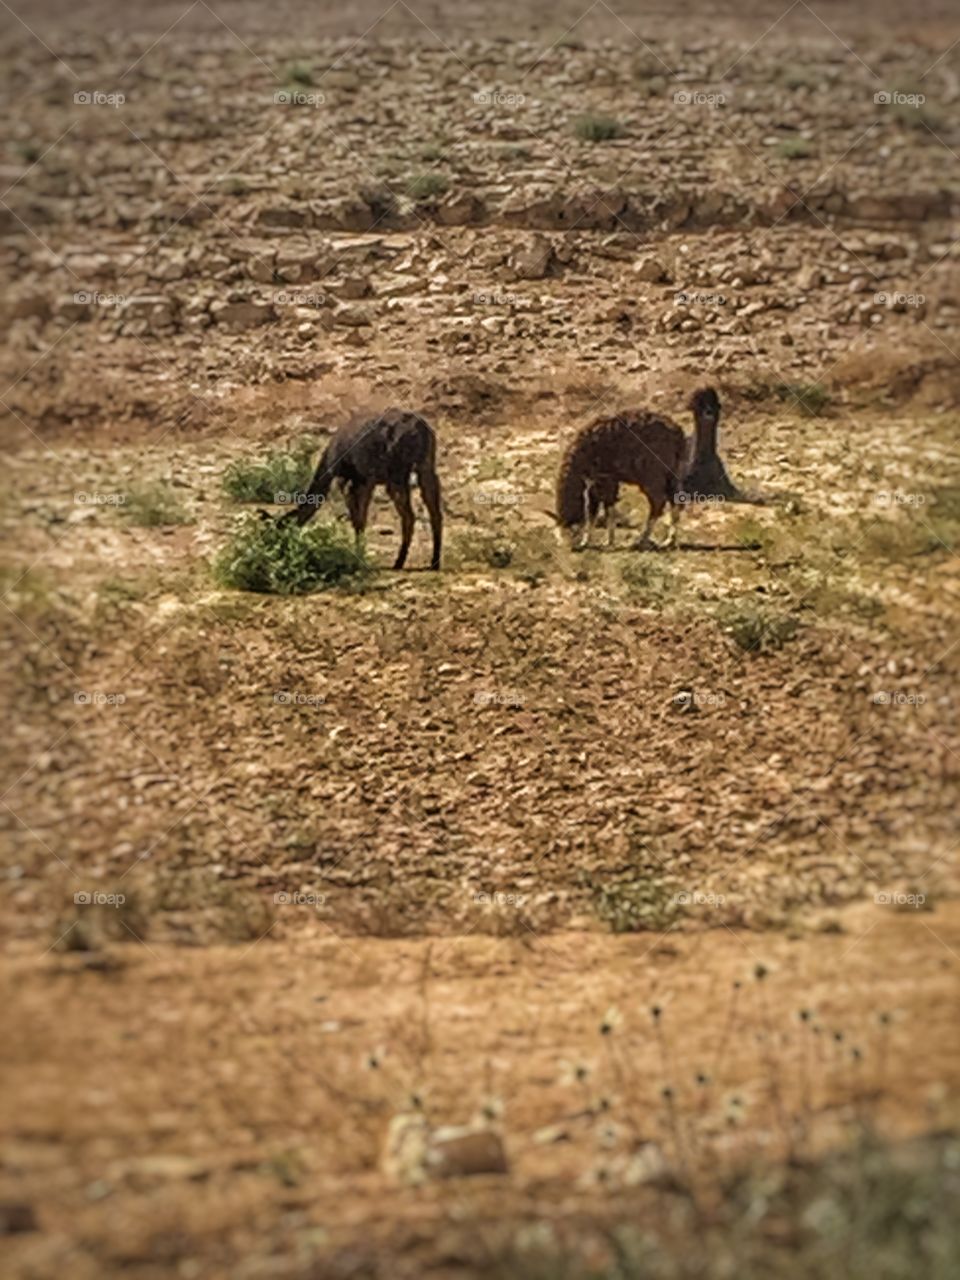 desert alpacas hanging out looking for food

